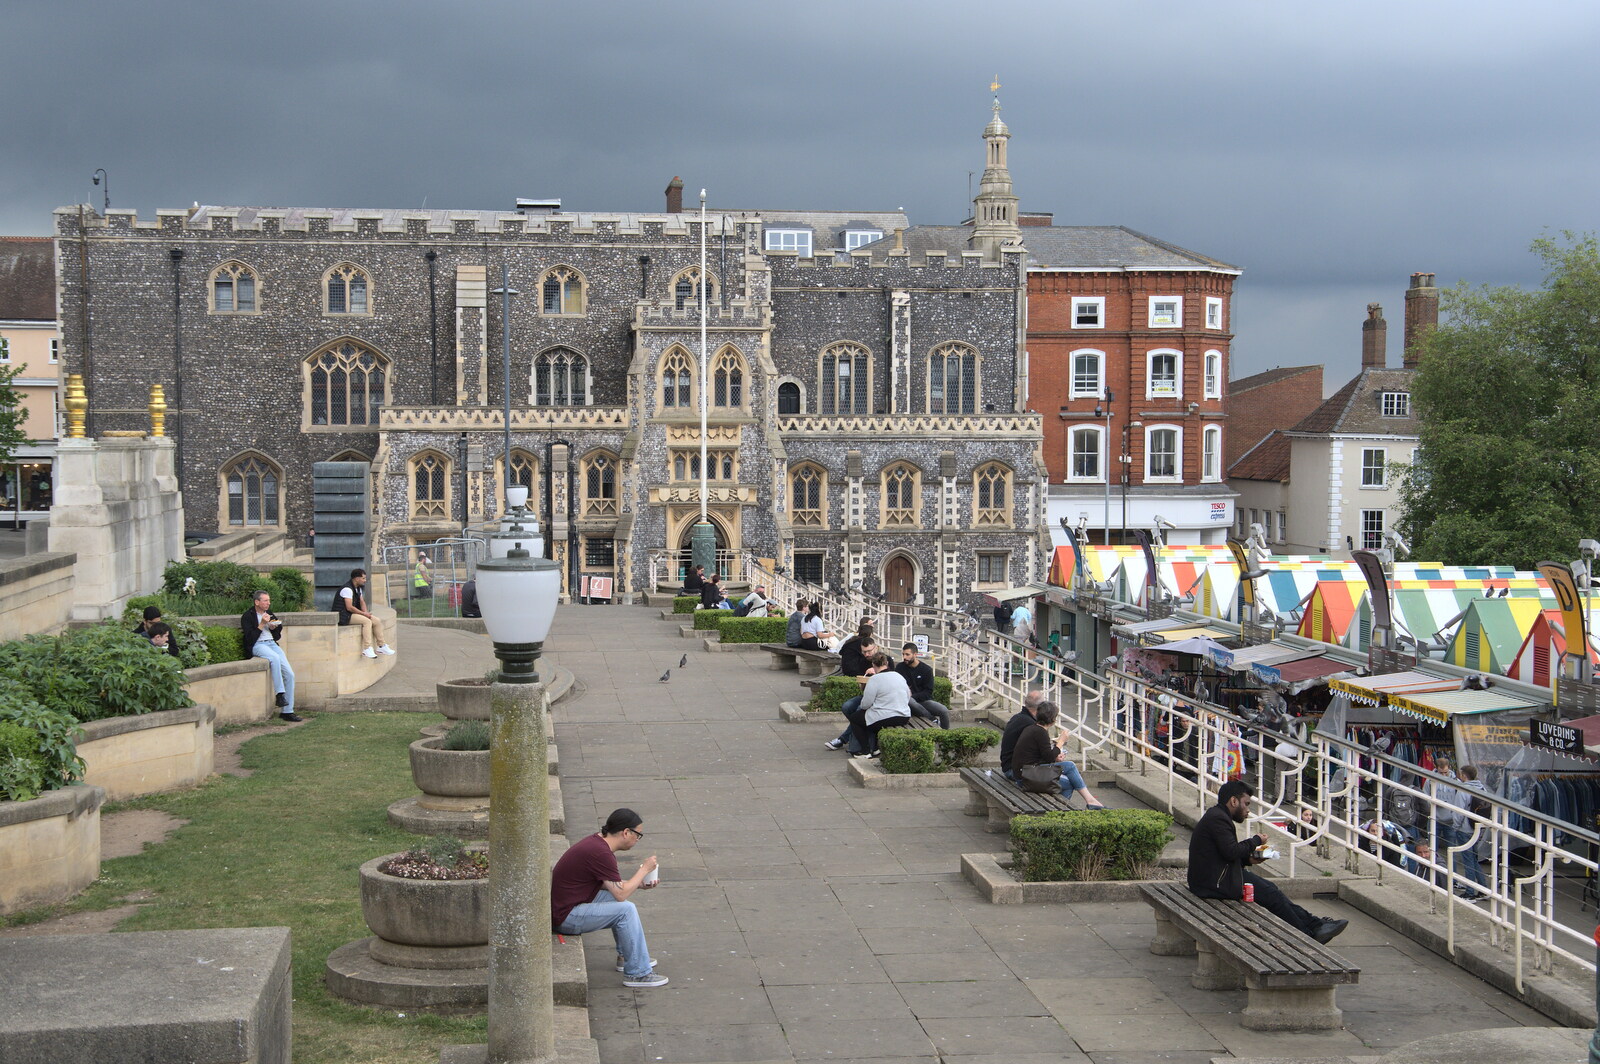 Another view of the Guildhall from Discovering the Hidden City: Norwich, Norfolk - 23rd May 2022